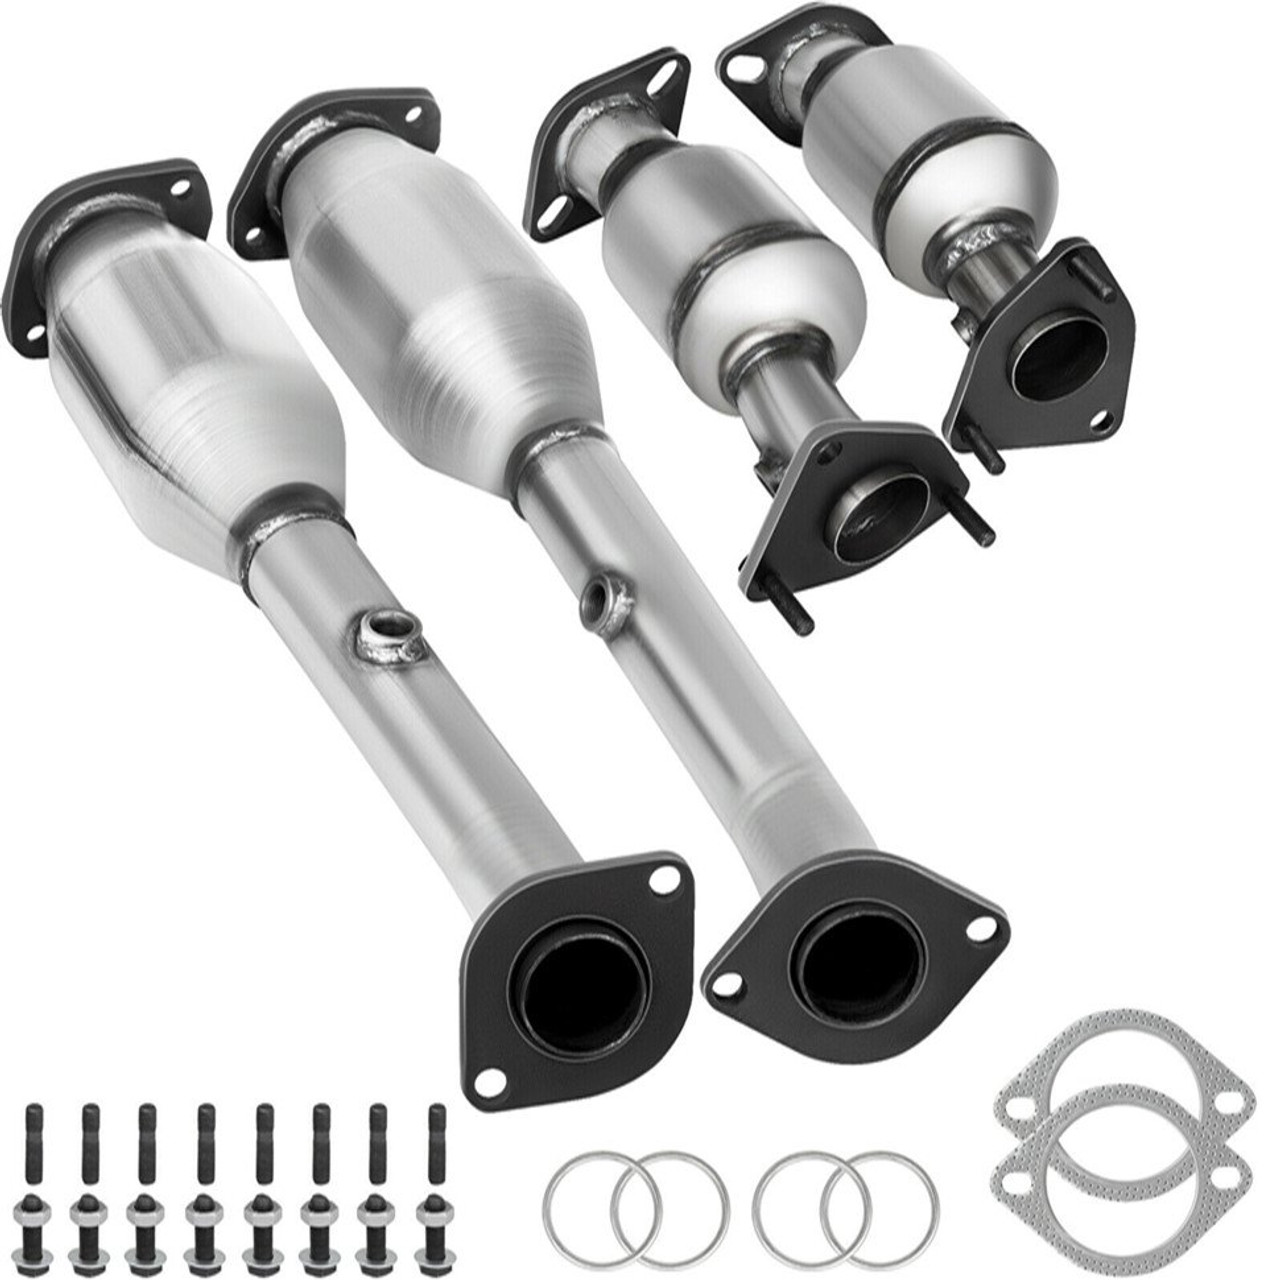 Exhaust Manifold 05-11 Nissan Frontier Exhaust Manifold Bolts Gasket Combination 4.0L OEM Quality High Flow Catalytic Converter for 2005-2011 Nissan Frontier/Xterra/Pathfinder(EPA Compliant)